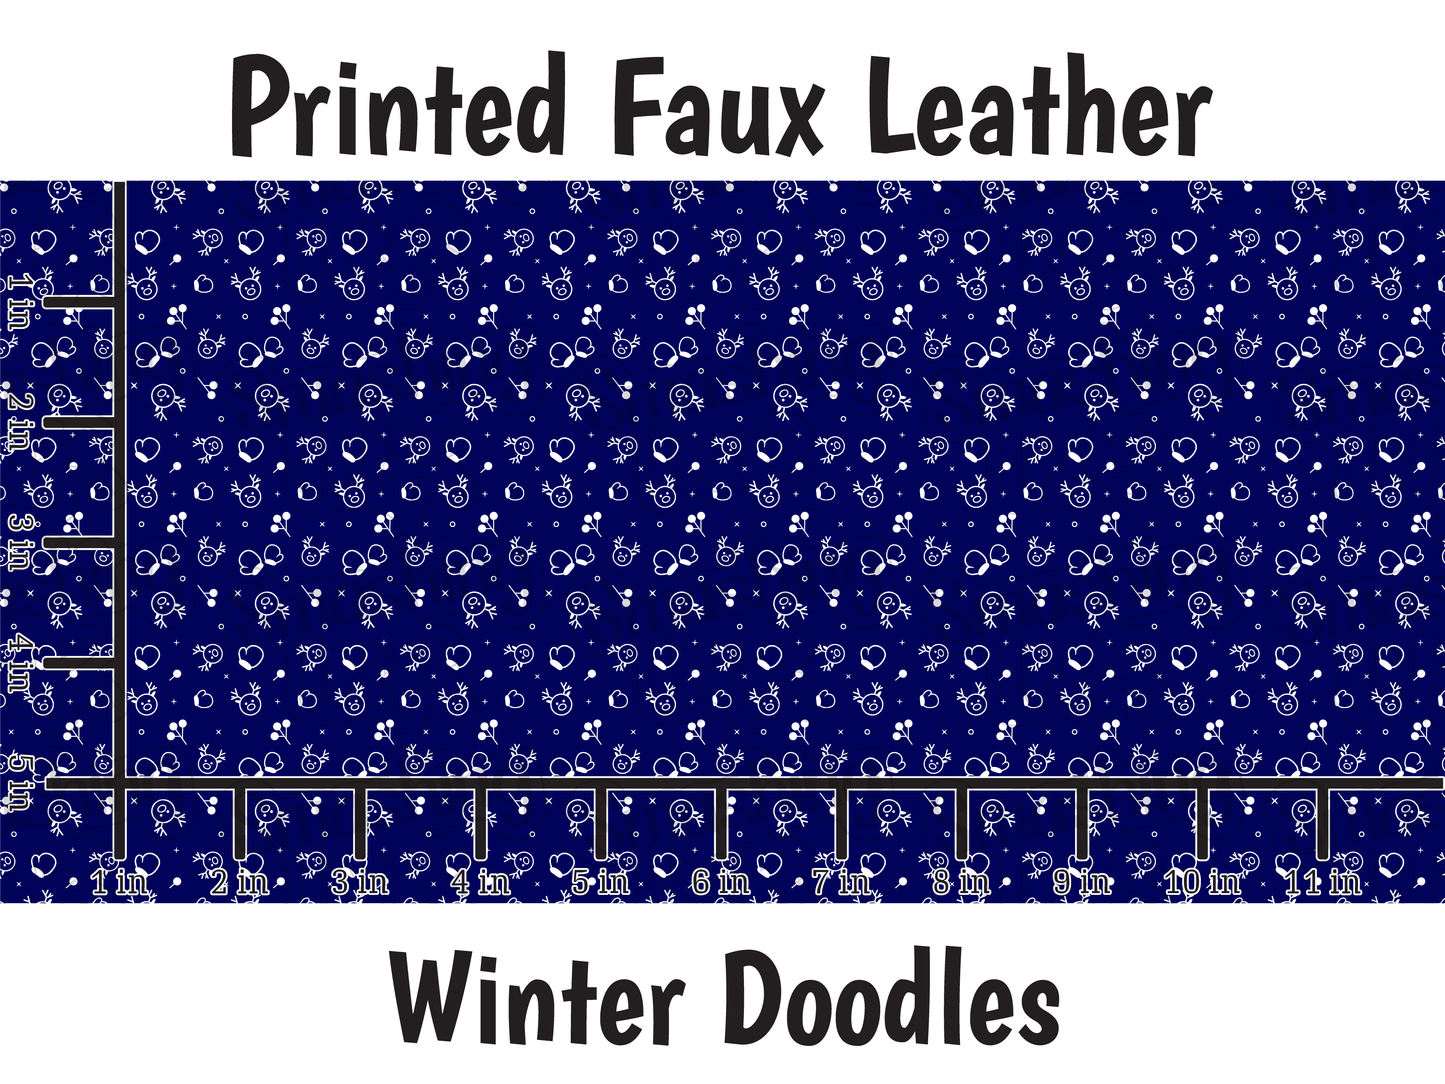 Winter Doodles - Faux Leather Sheet (SHIPS IN 3 BUS DAYS)